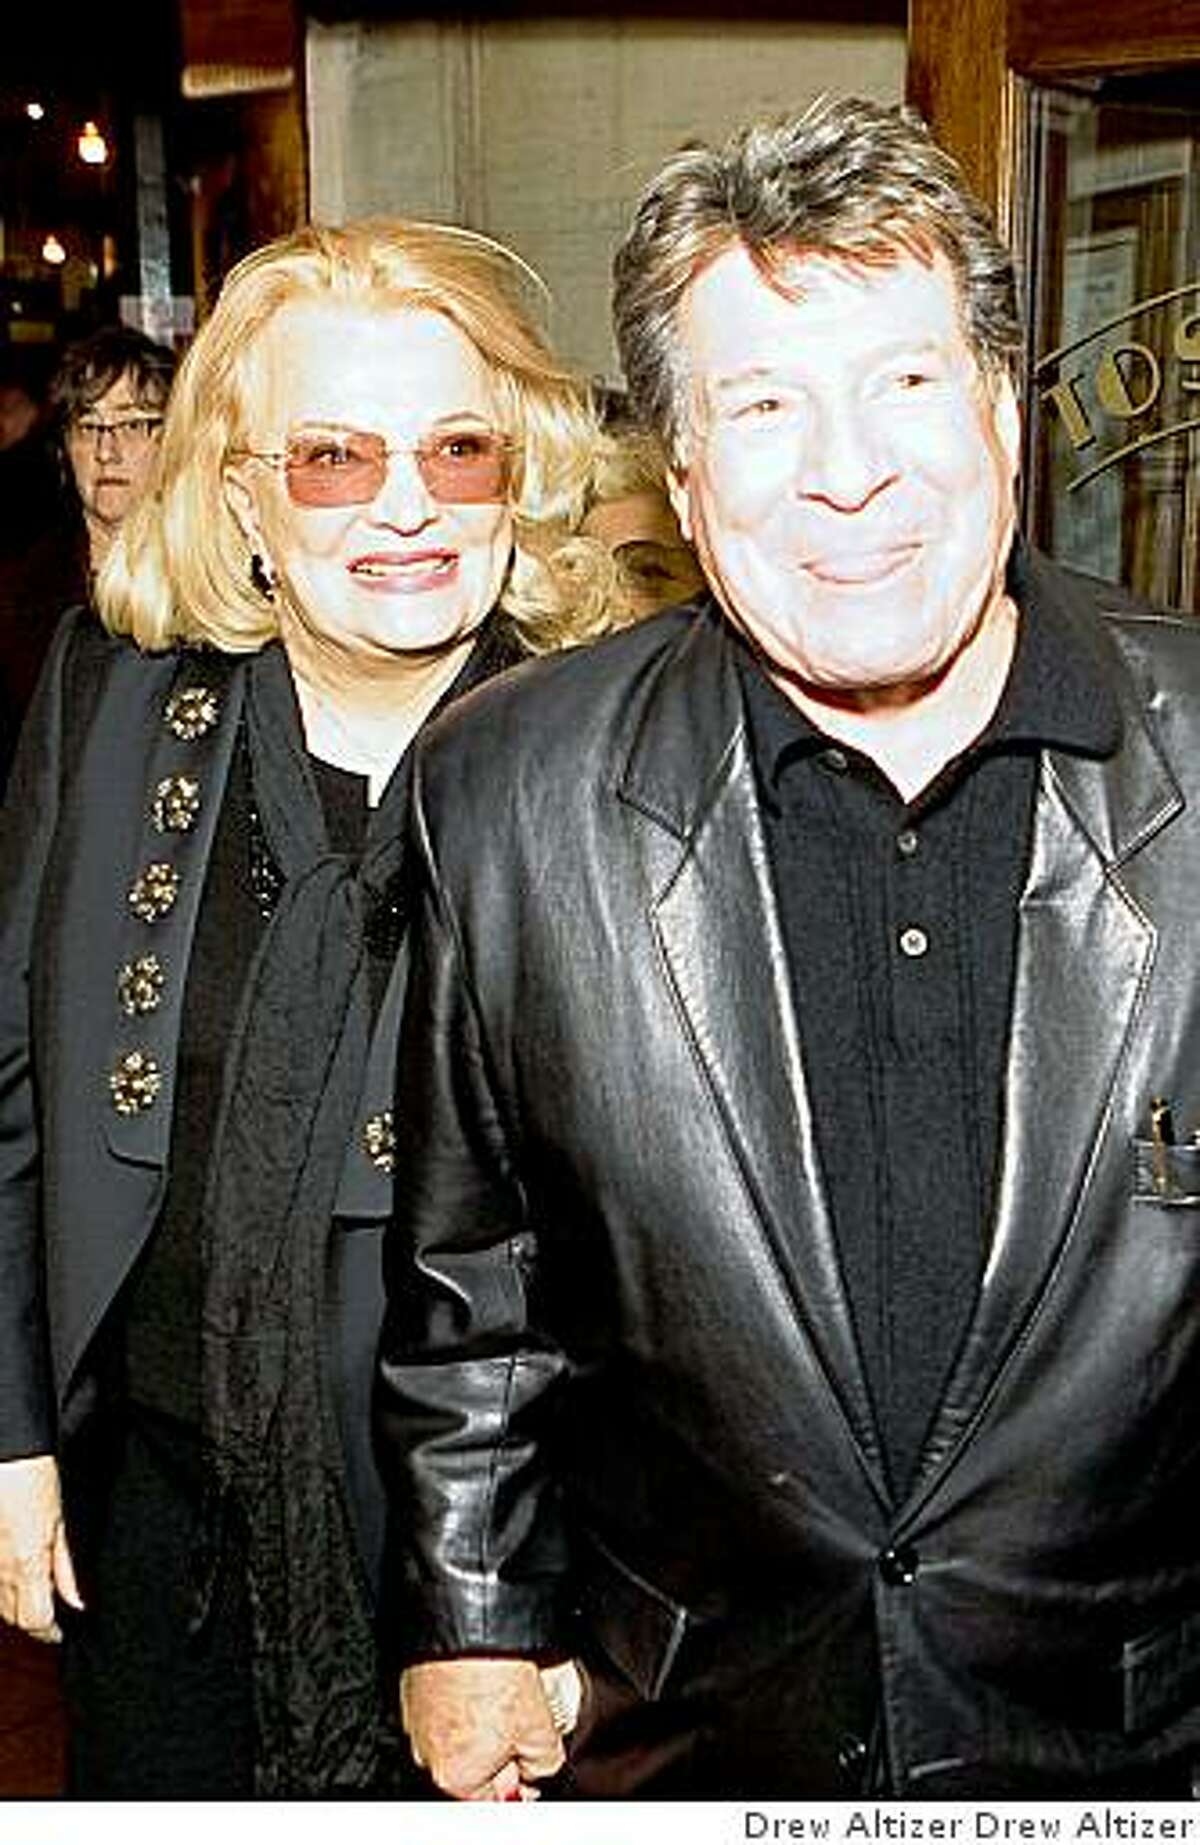 The San Francisco International Film Festival and Tosca Cafe hosted an after-party for the screening of the recently restored "Woman Under the Influence," a 1974 classic by John Cassavetes. The party was April 26, 2009. From left to right: Gena Rowlands, Robert Forrest